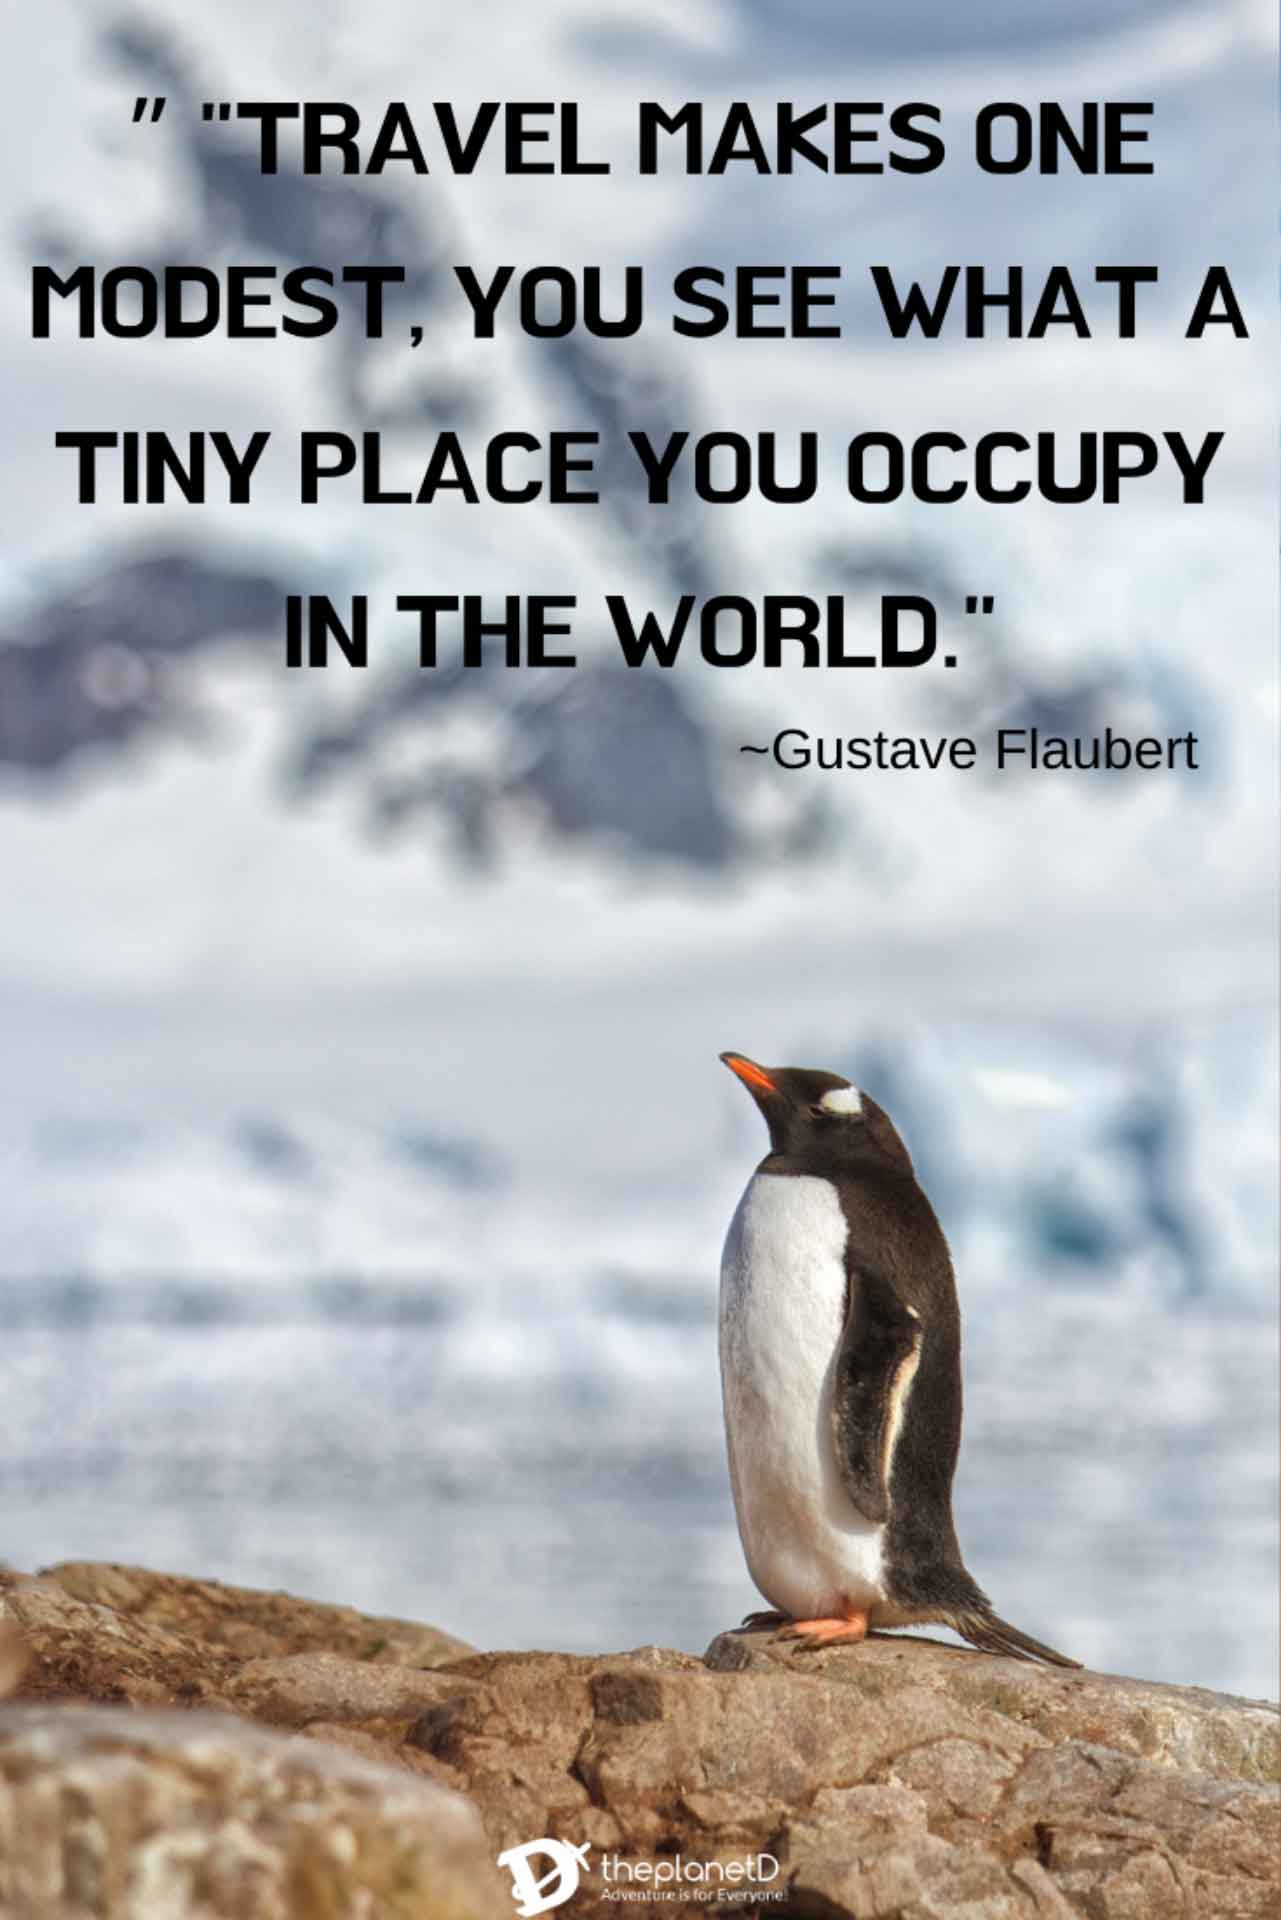 61 Best Travel Quotes to Inspire You - The Ultimate List